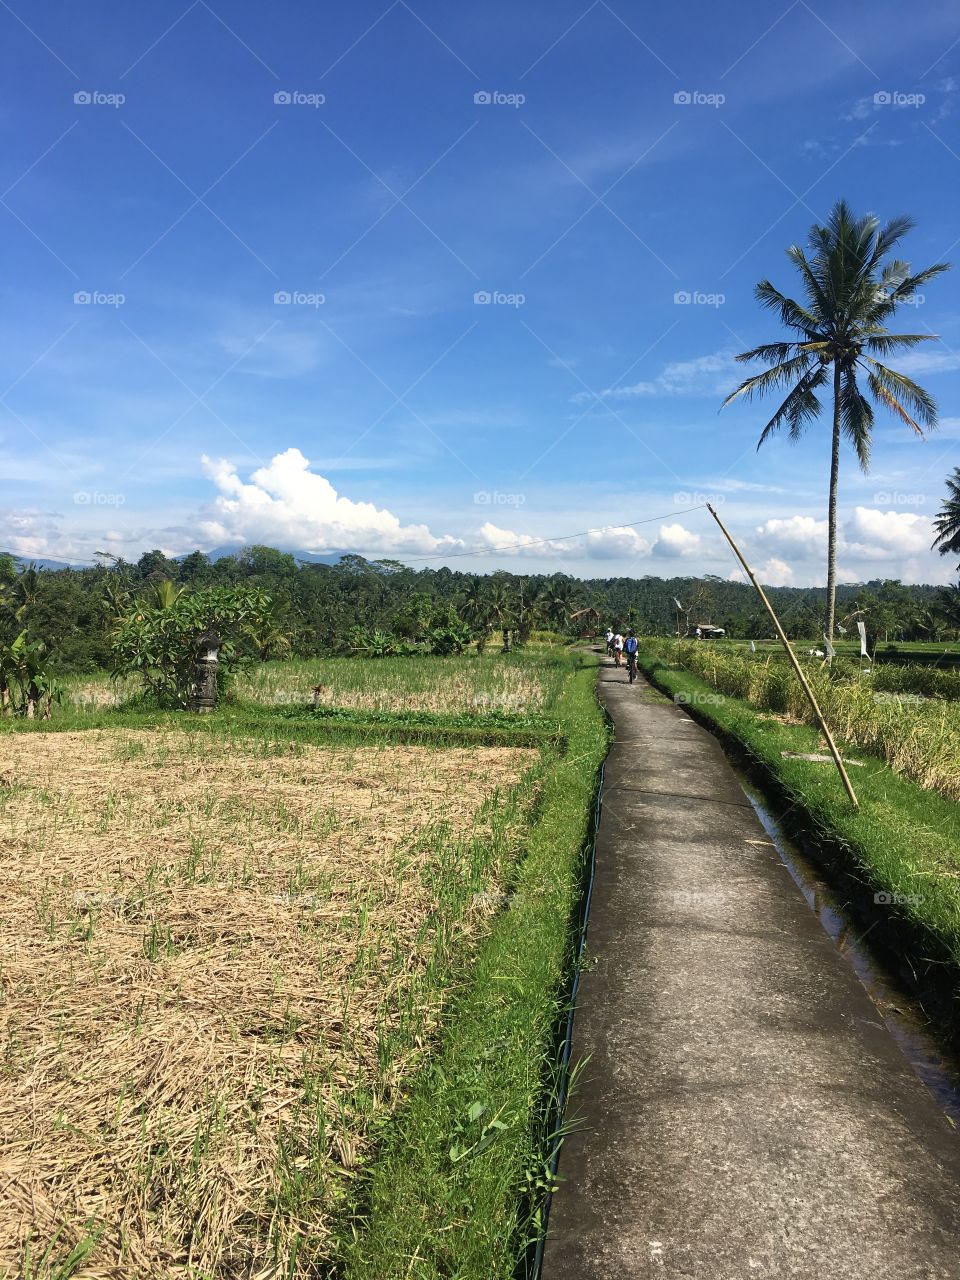 I was doing a bicycle tour, being shown the beauty of the rice paddies of Bali 